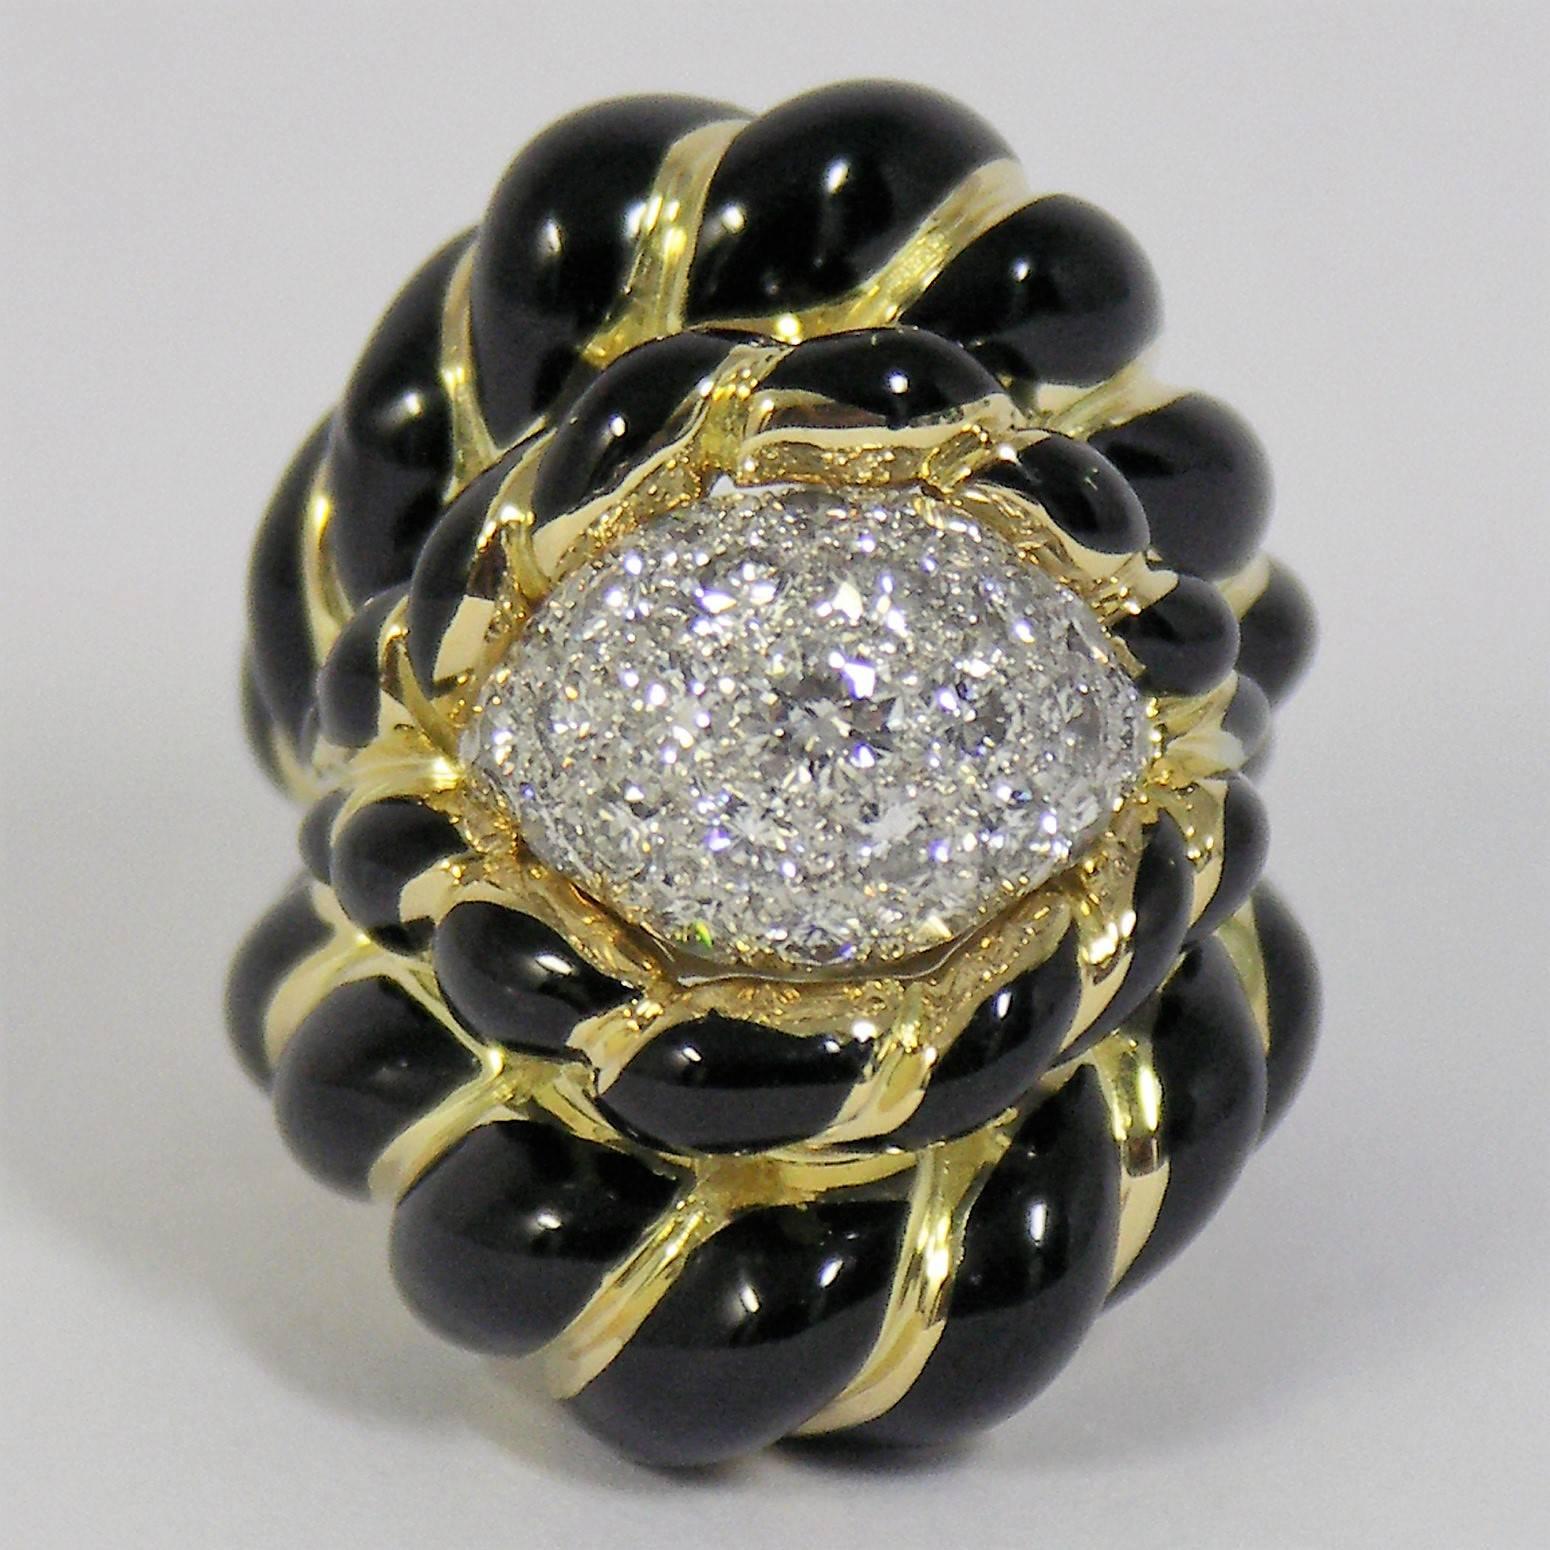 This handsome, black enamel twisted rope design, features a platinum, pave dome in the center, set with assorted round brilliant cut diamonds weighing an approximate total of 2.00ct. The sizing spring inside is signed WEBB PLAT 18K.
Presently the